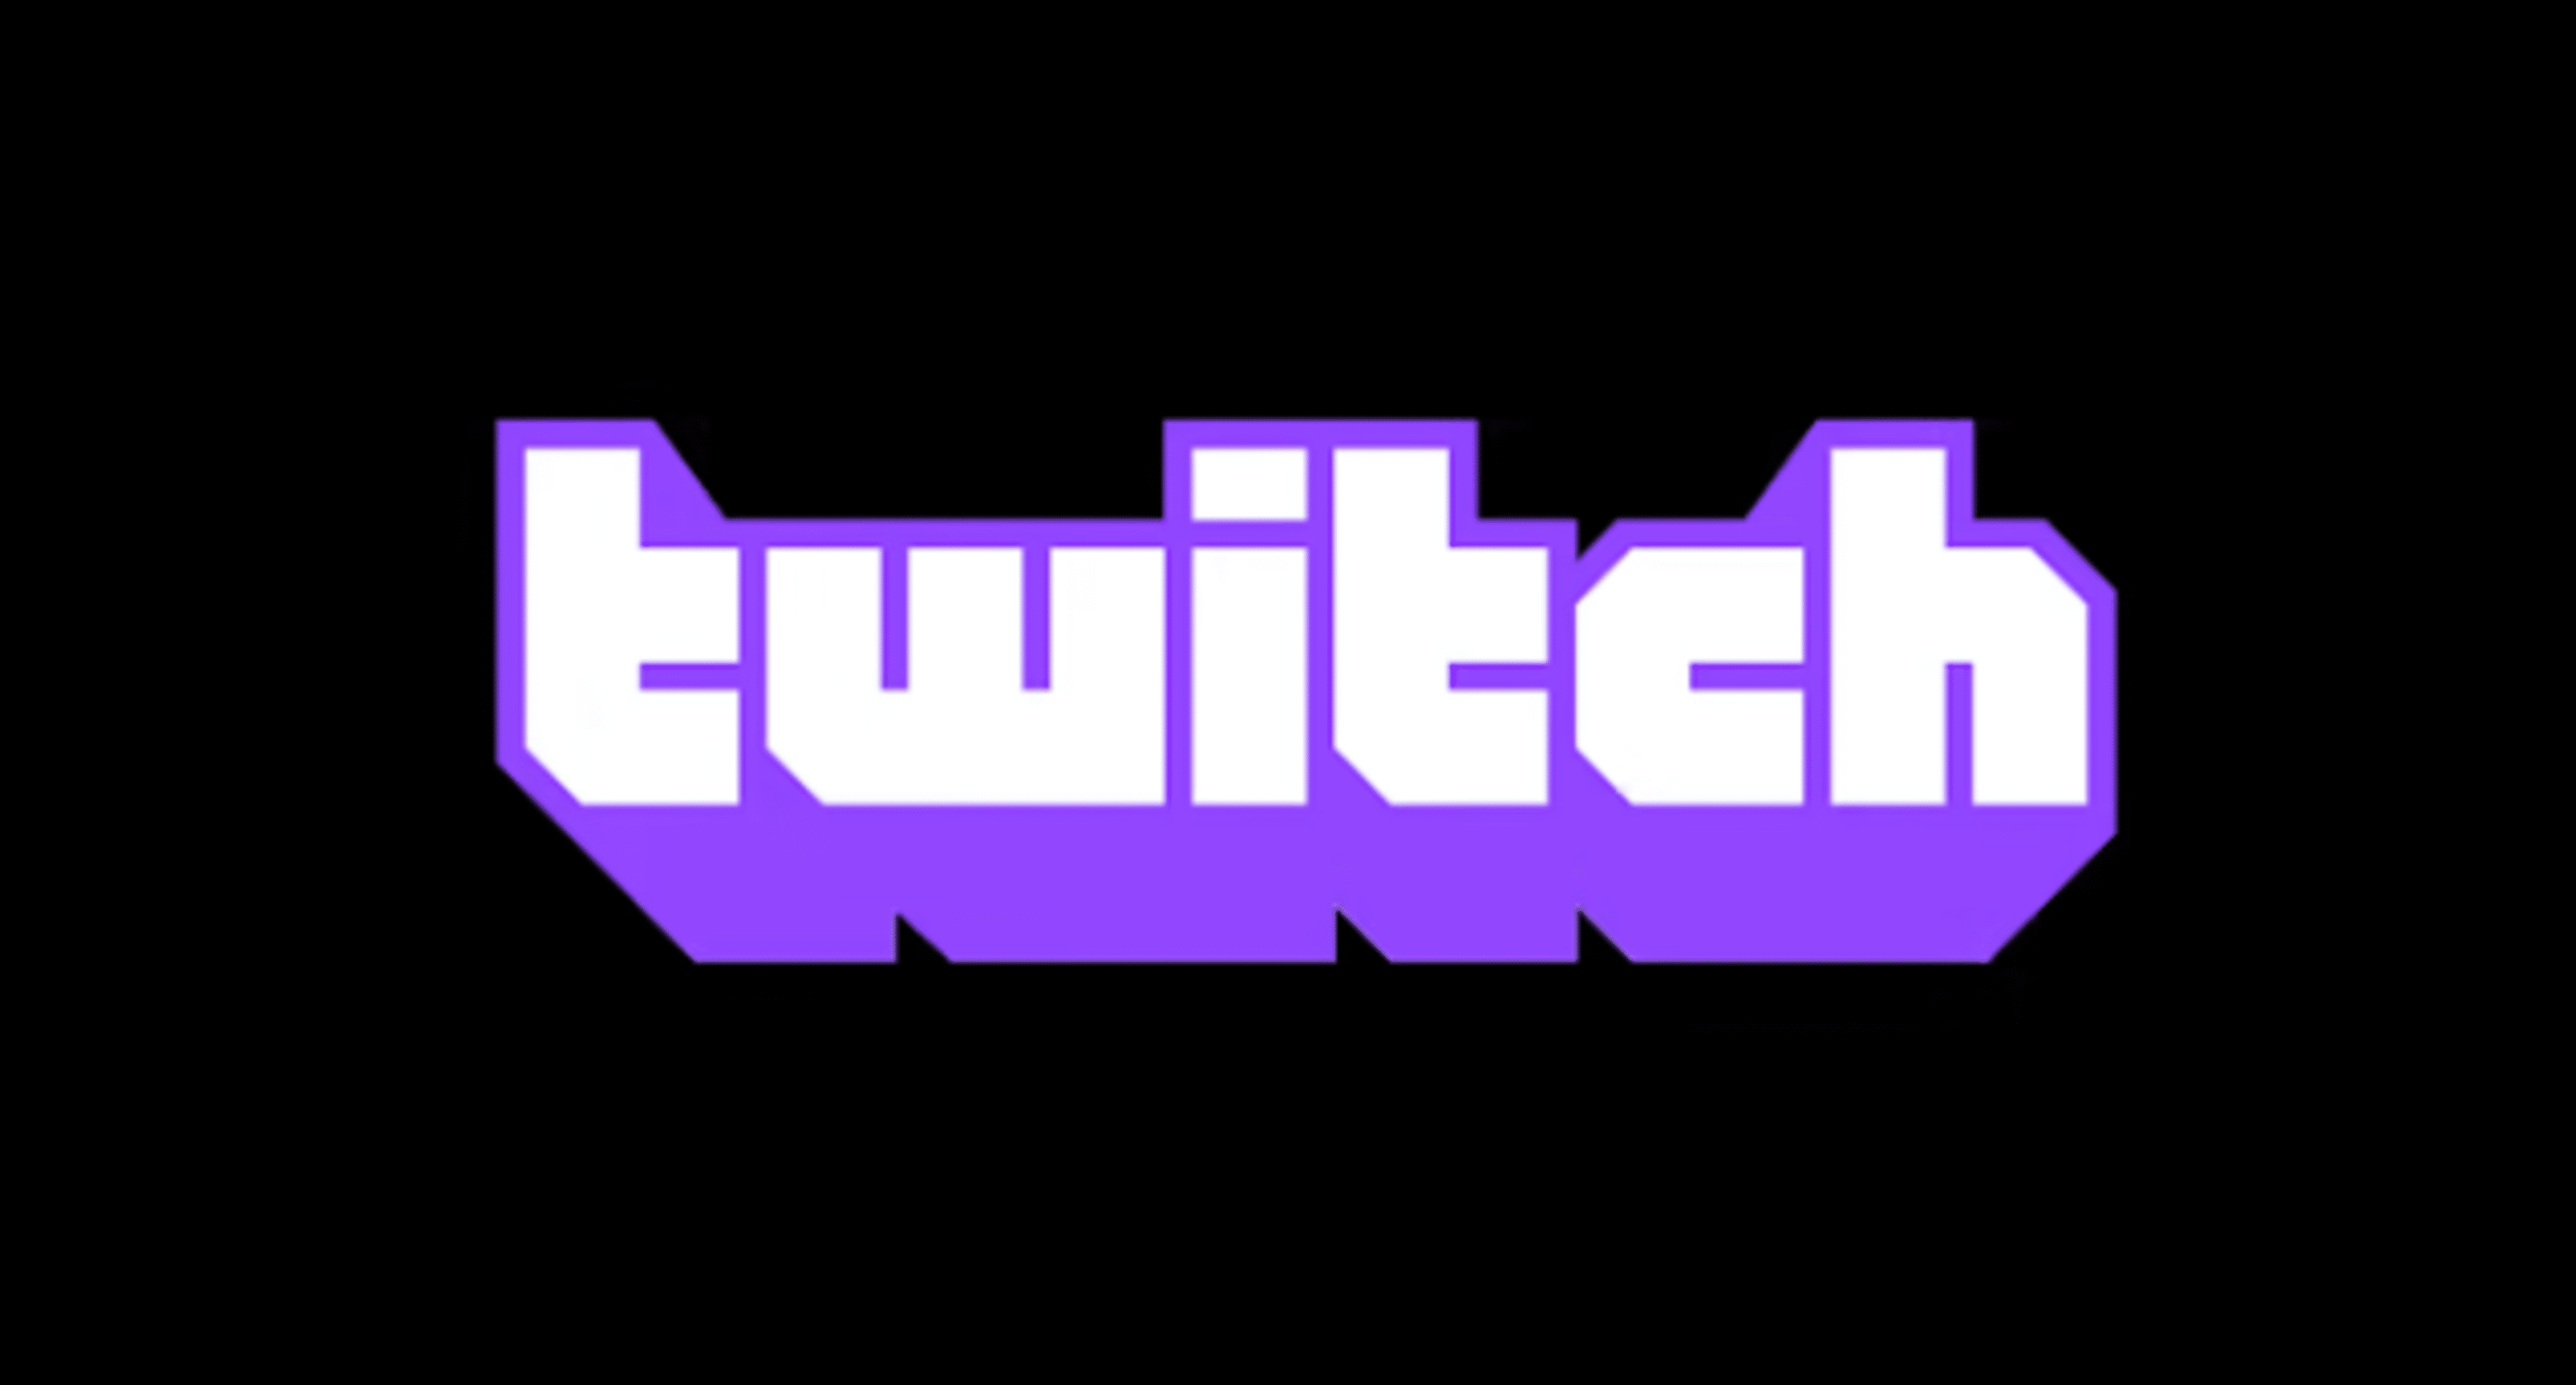 According To Twitch, A Revenue Split Of 70/30 Is Not Sustainable Over The Long Haul